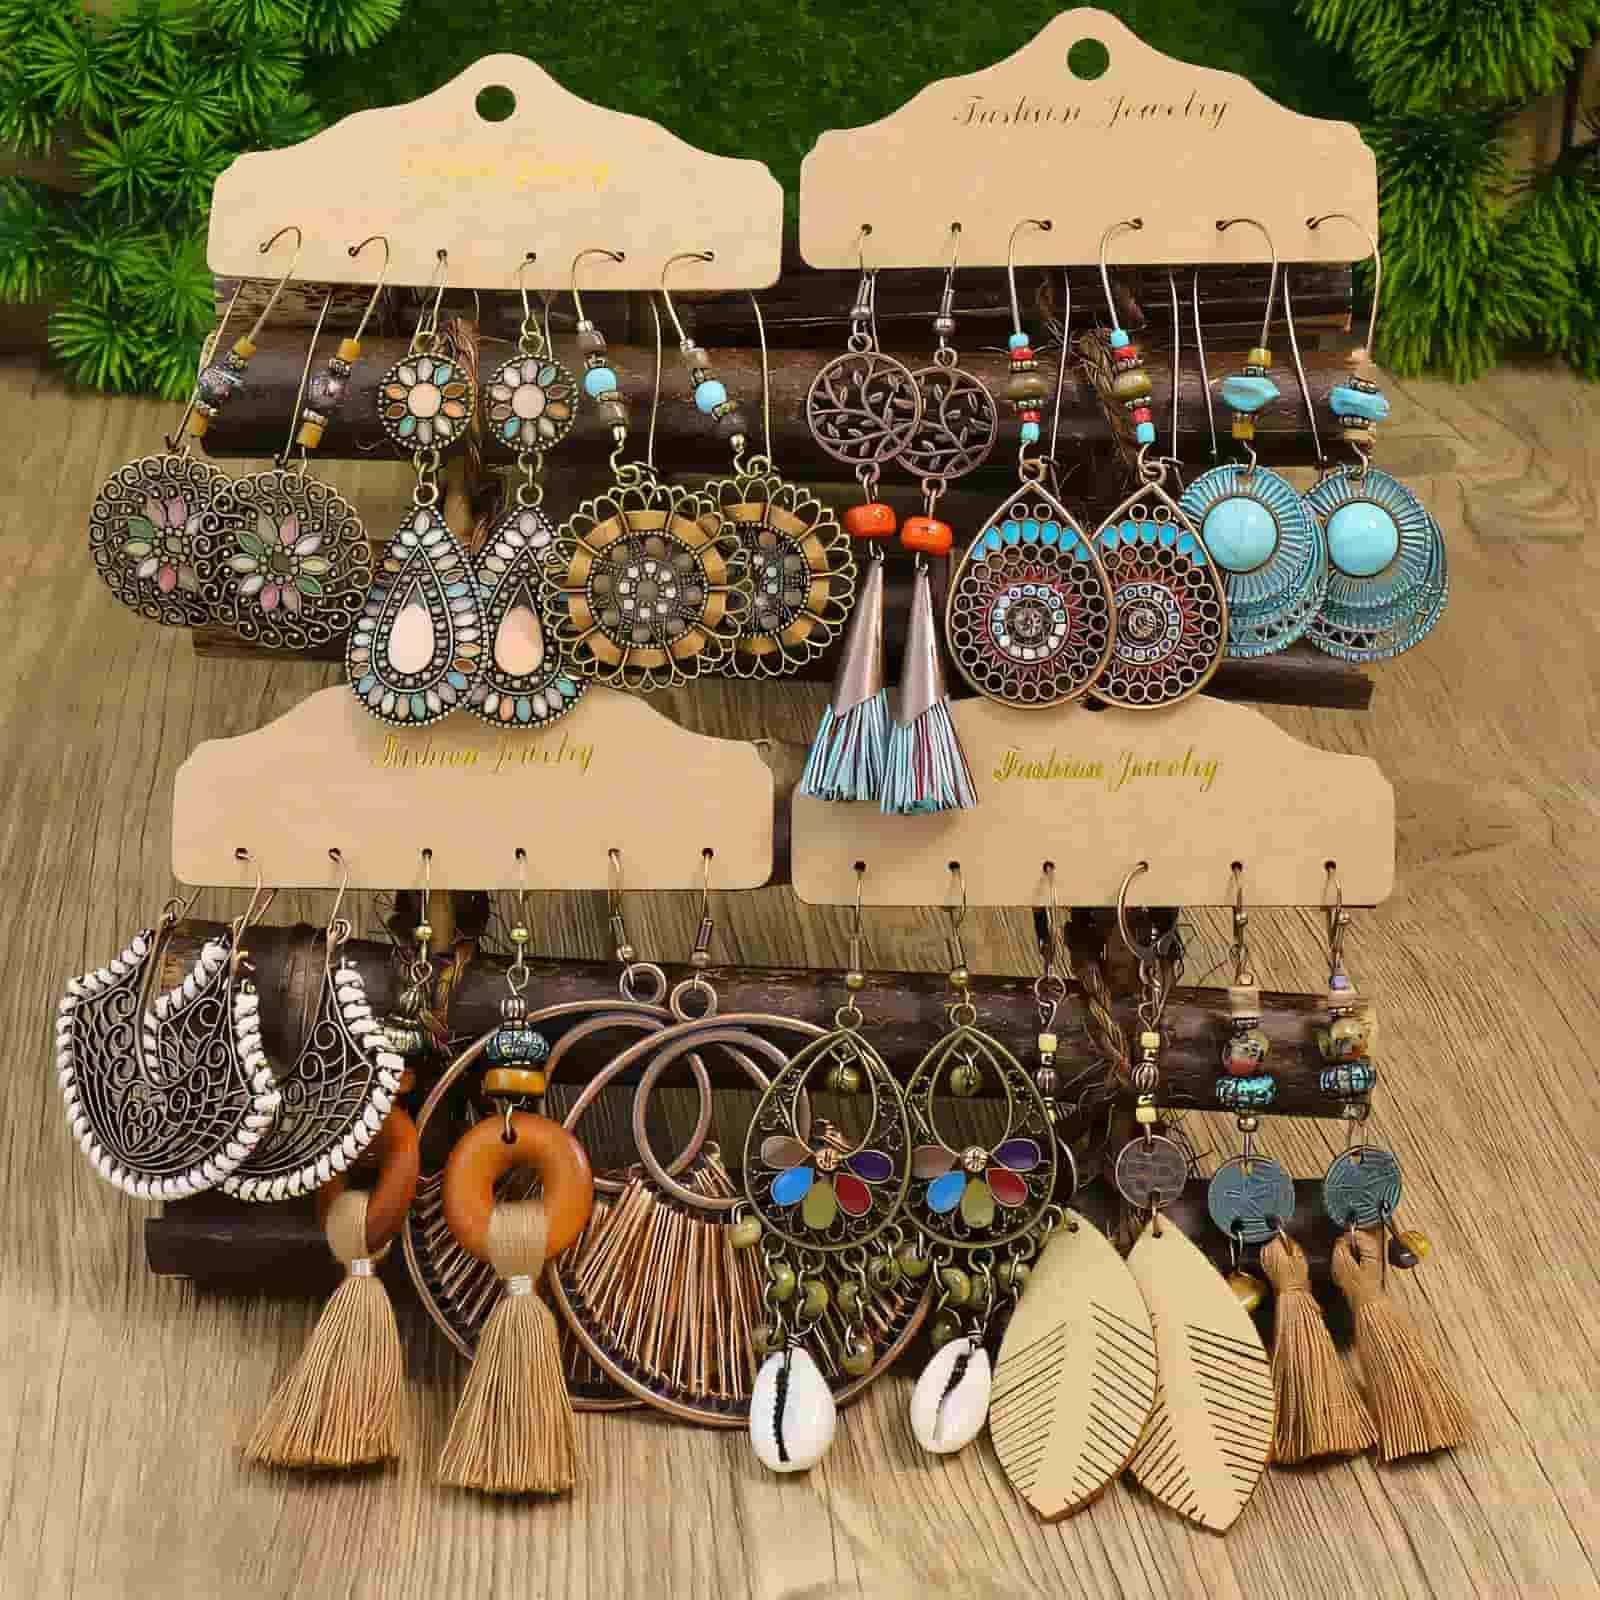 Bohemian Elegance Collection: 12 Pairs of Vintage-Inspired Coffee Dangle Earrings - Tremmi